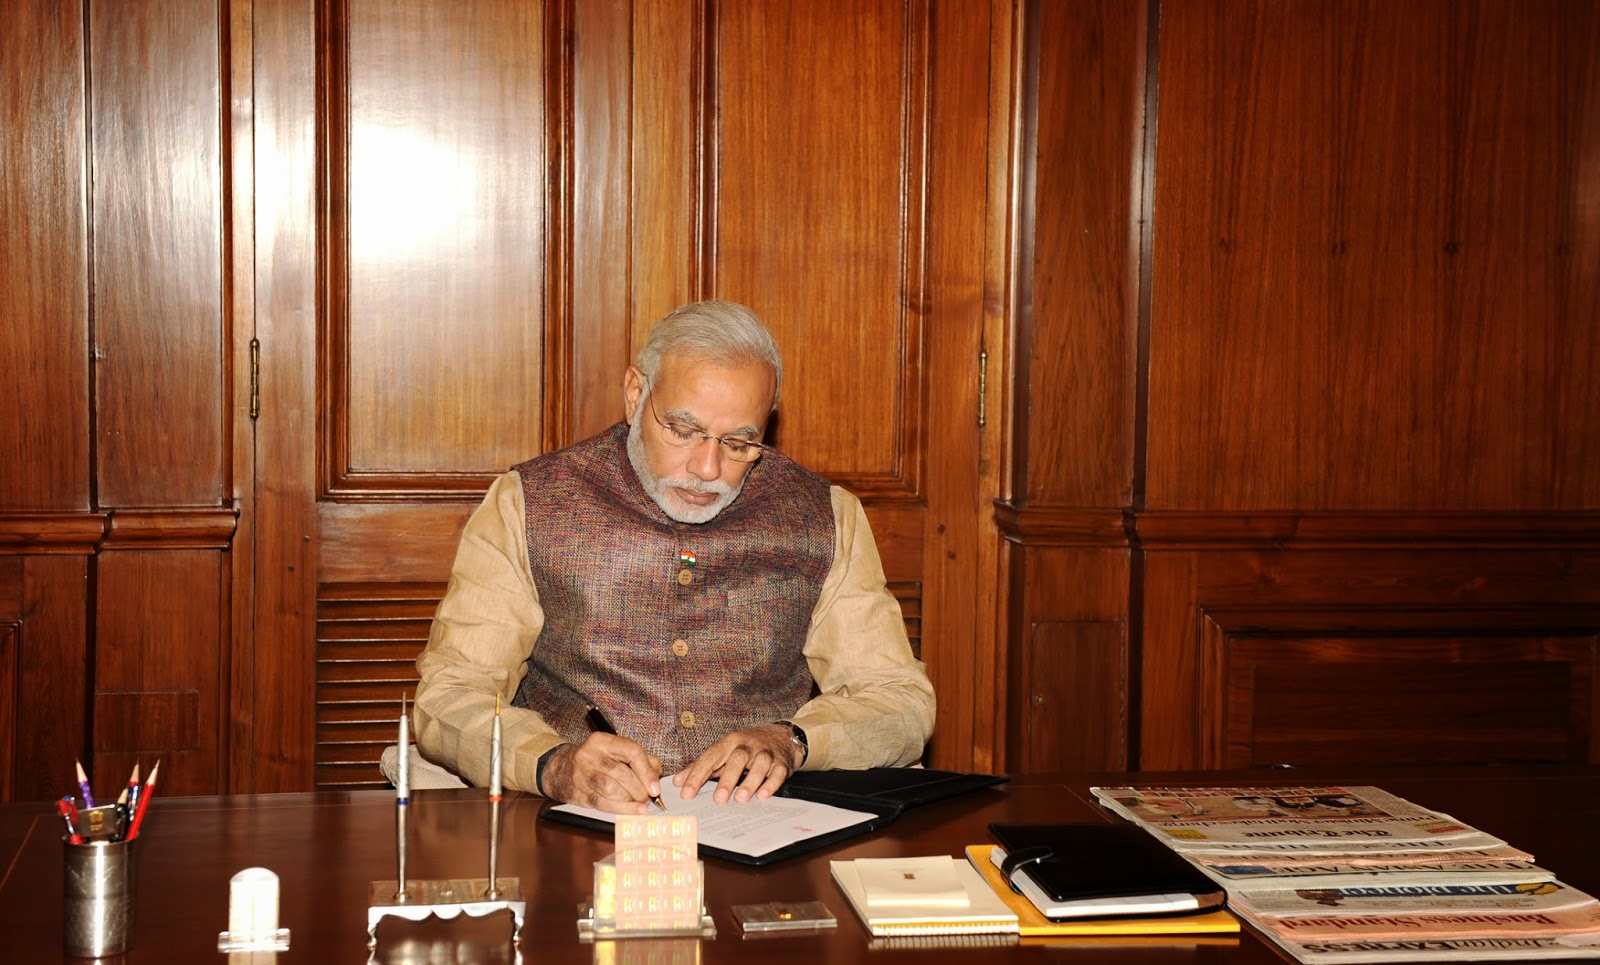 Ministry of Information & Broadcasting: Shri Narendra Modi assumes office  as 15th Prime Minister of India